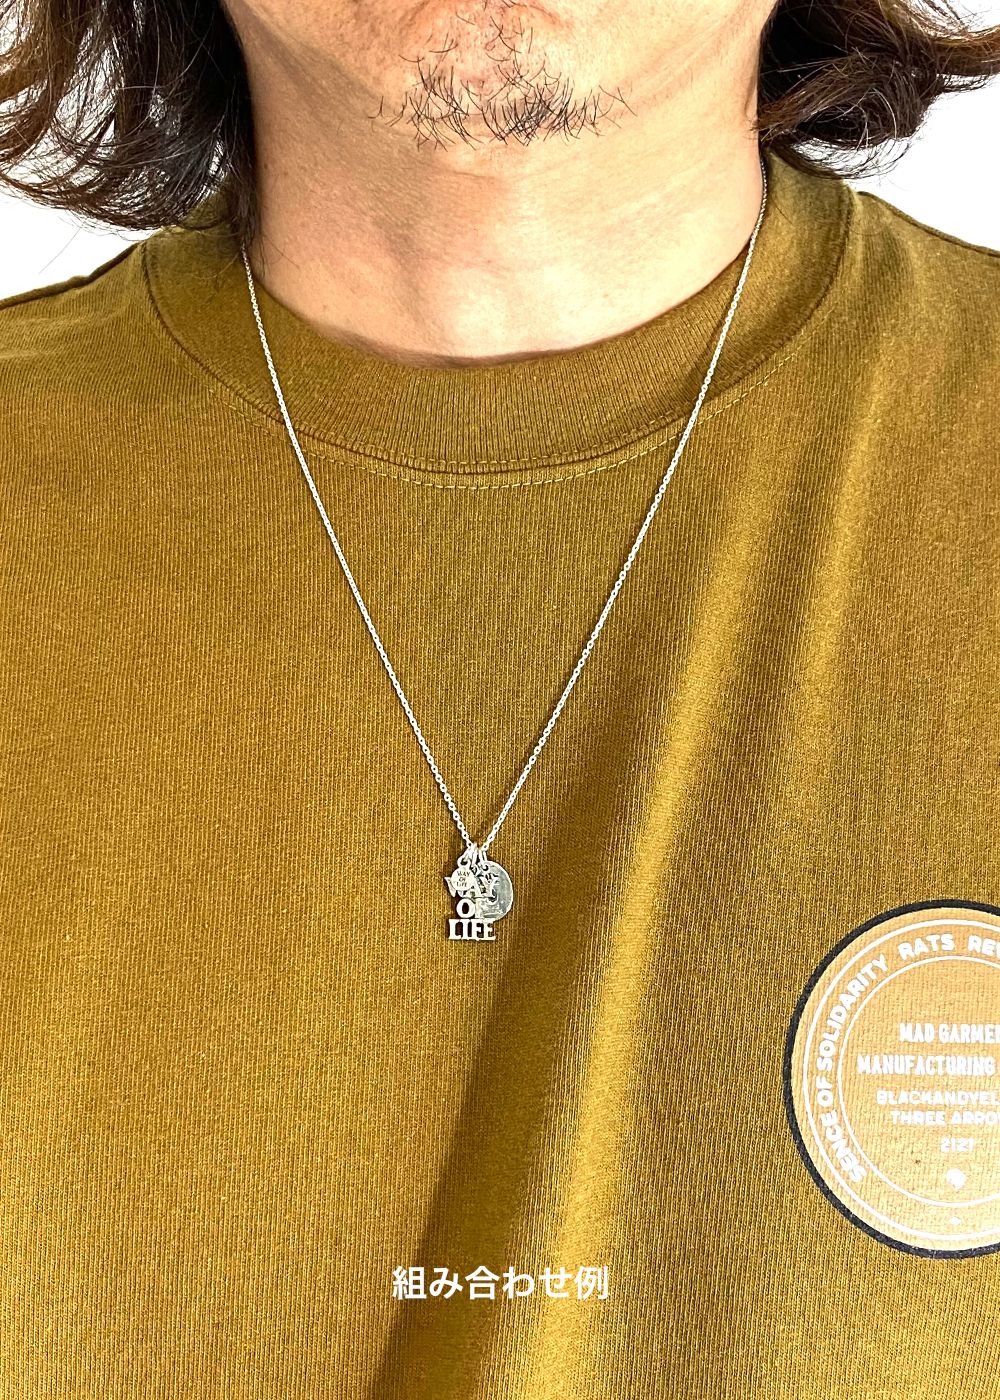 RATS - NECKLACE WAY OF LIFE SILVER (SILVER) / シルバー ネックレス 